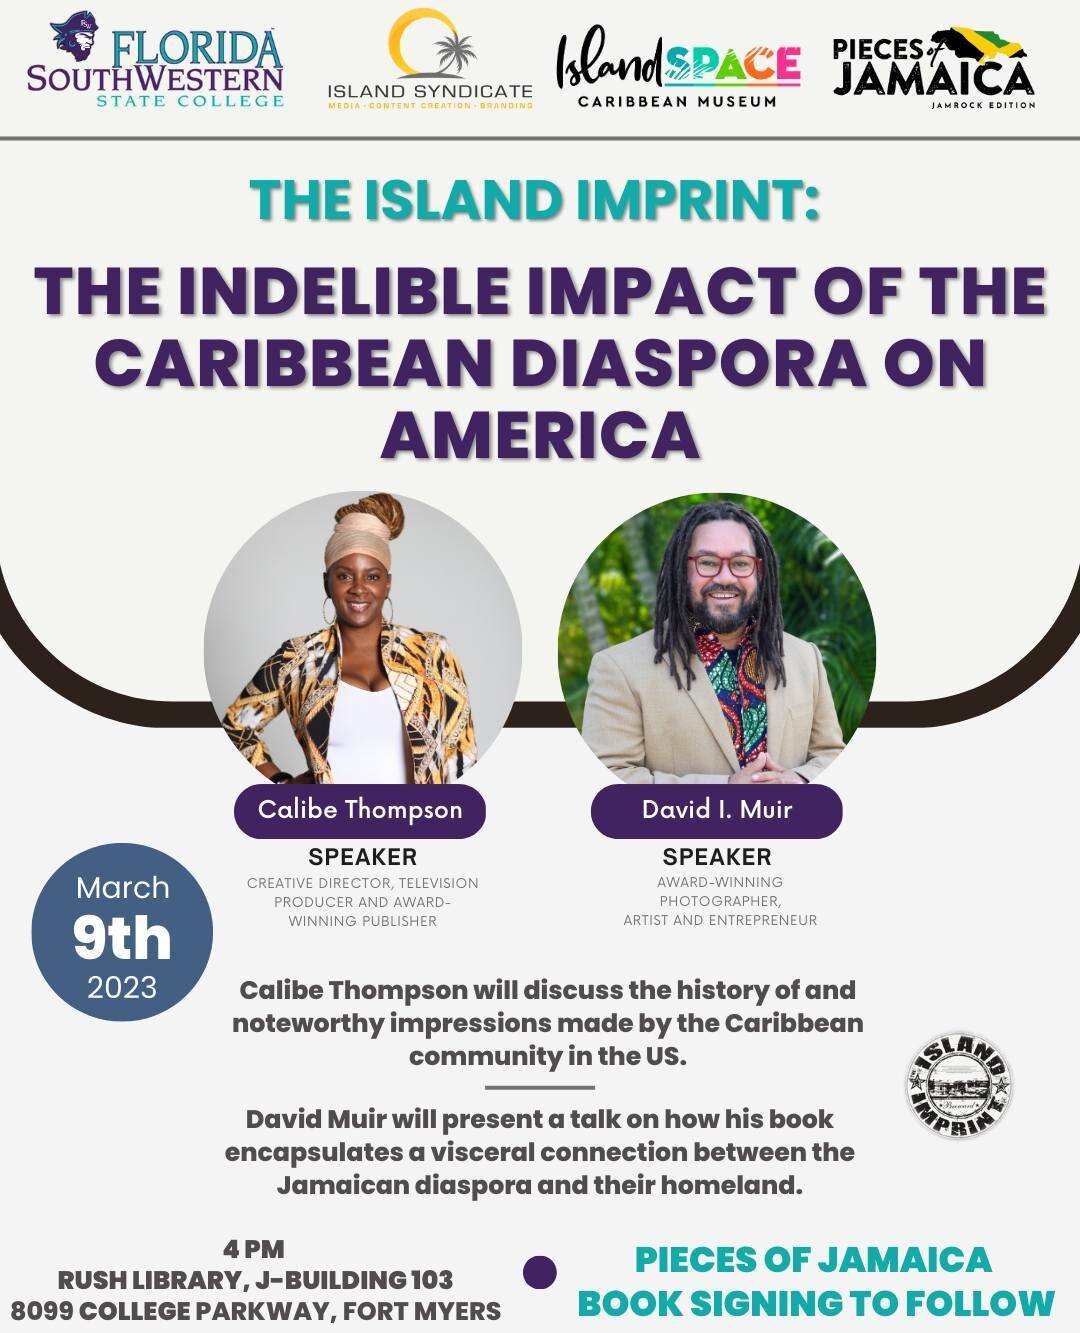 Island Syndicate founders Calibe Thompson and David I. Muir will be in Fort Meyers next week speaking at Florida SouthWestern State College about the Caribbean's global impact. ⁣⁣⁠
⁣⁣⁠
Thompson will discuss noteworthy impressions made by the Caribbea